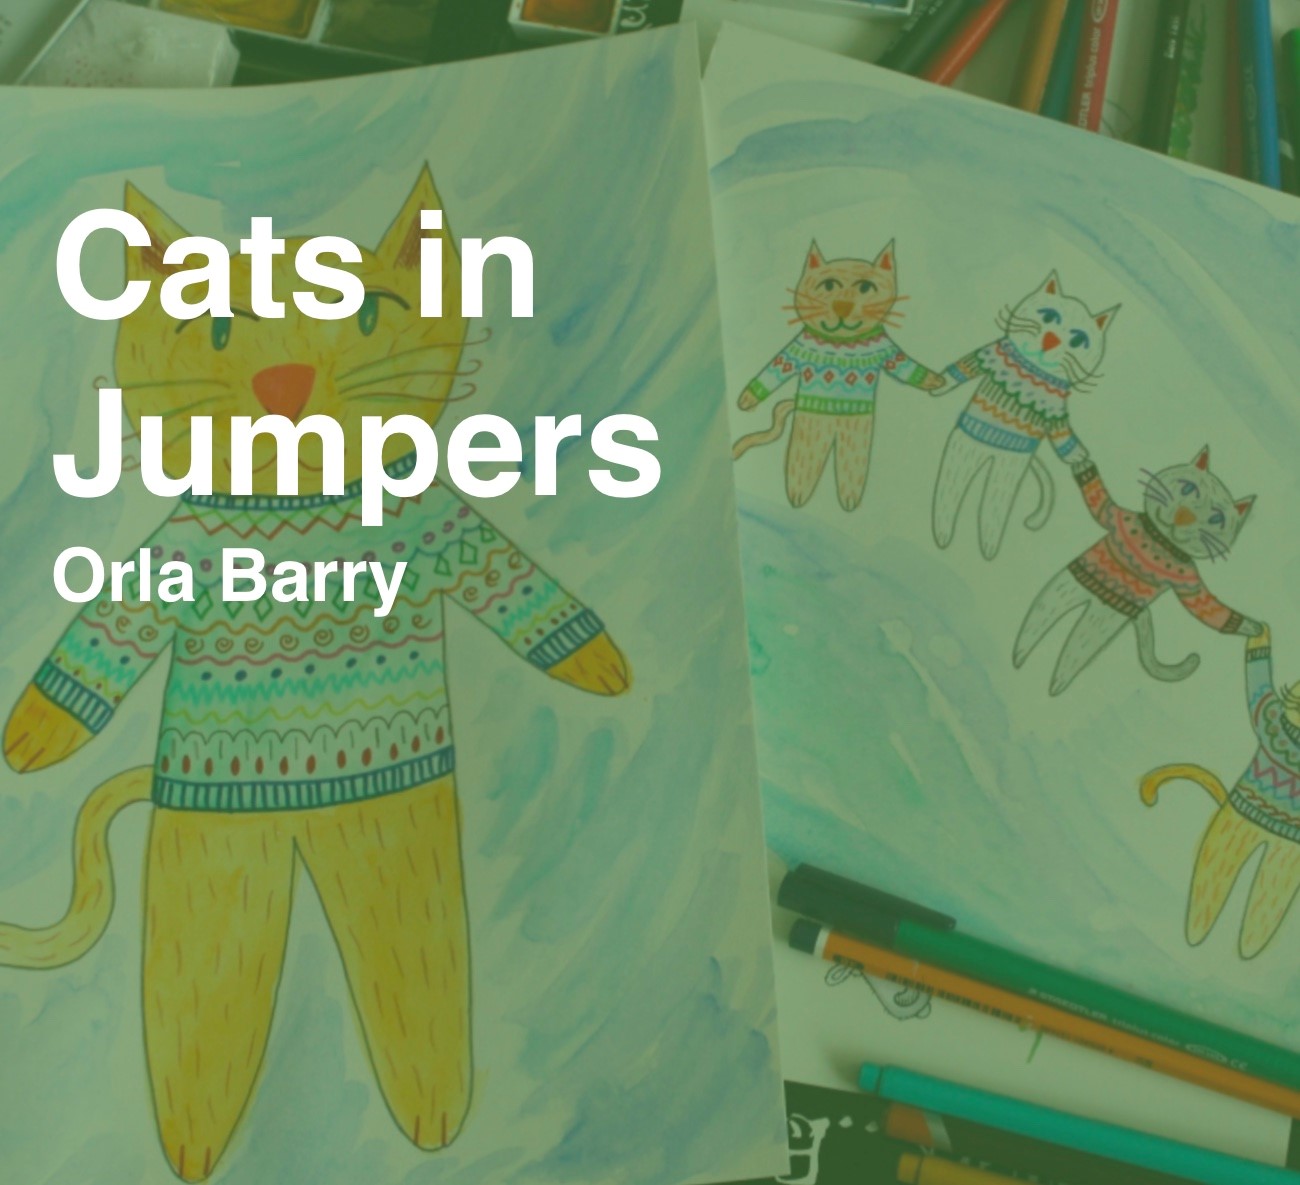 Friday Art Class- Cats in Jumpers